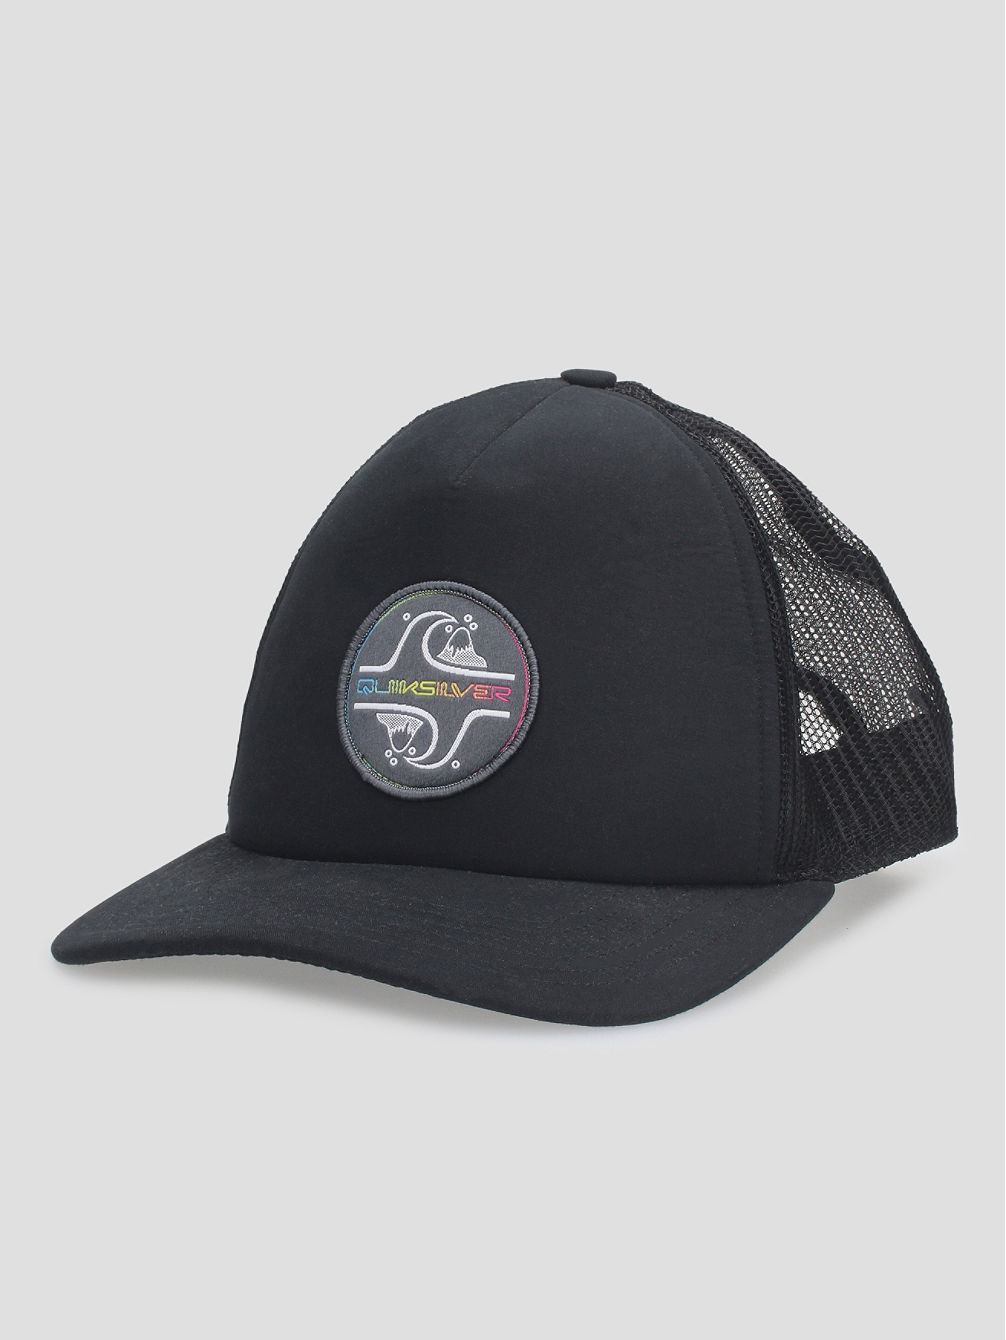 Groundswell Cap